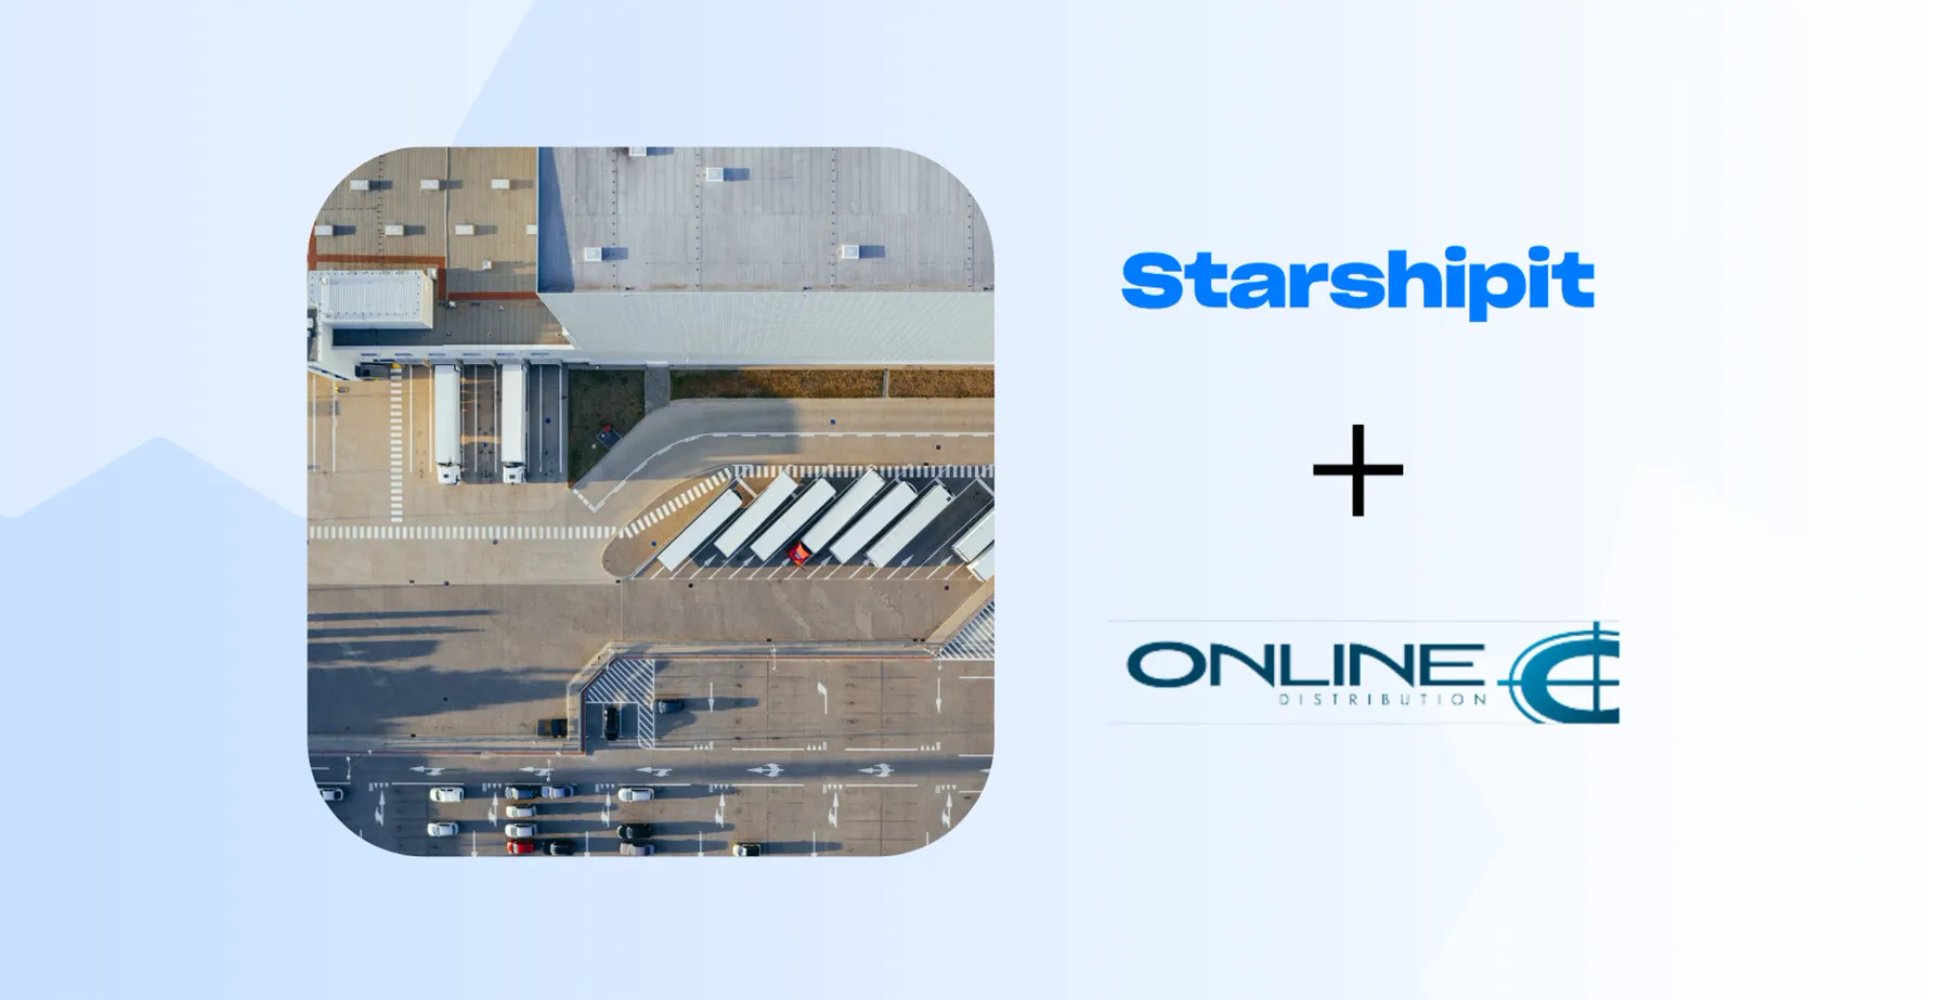 Starshipit and Online Distribution case study